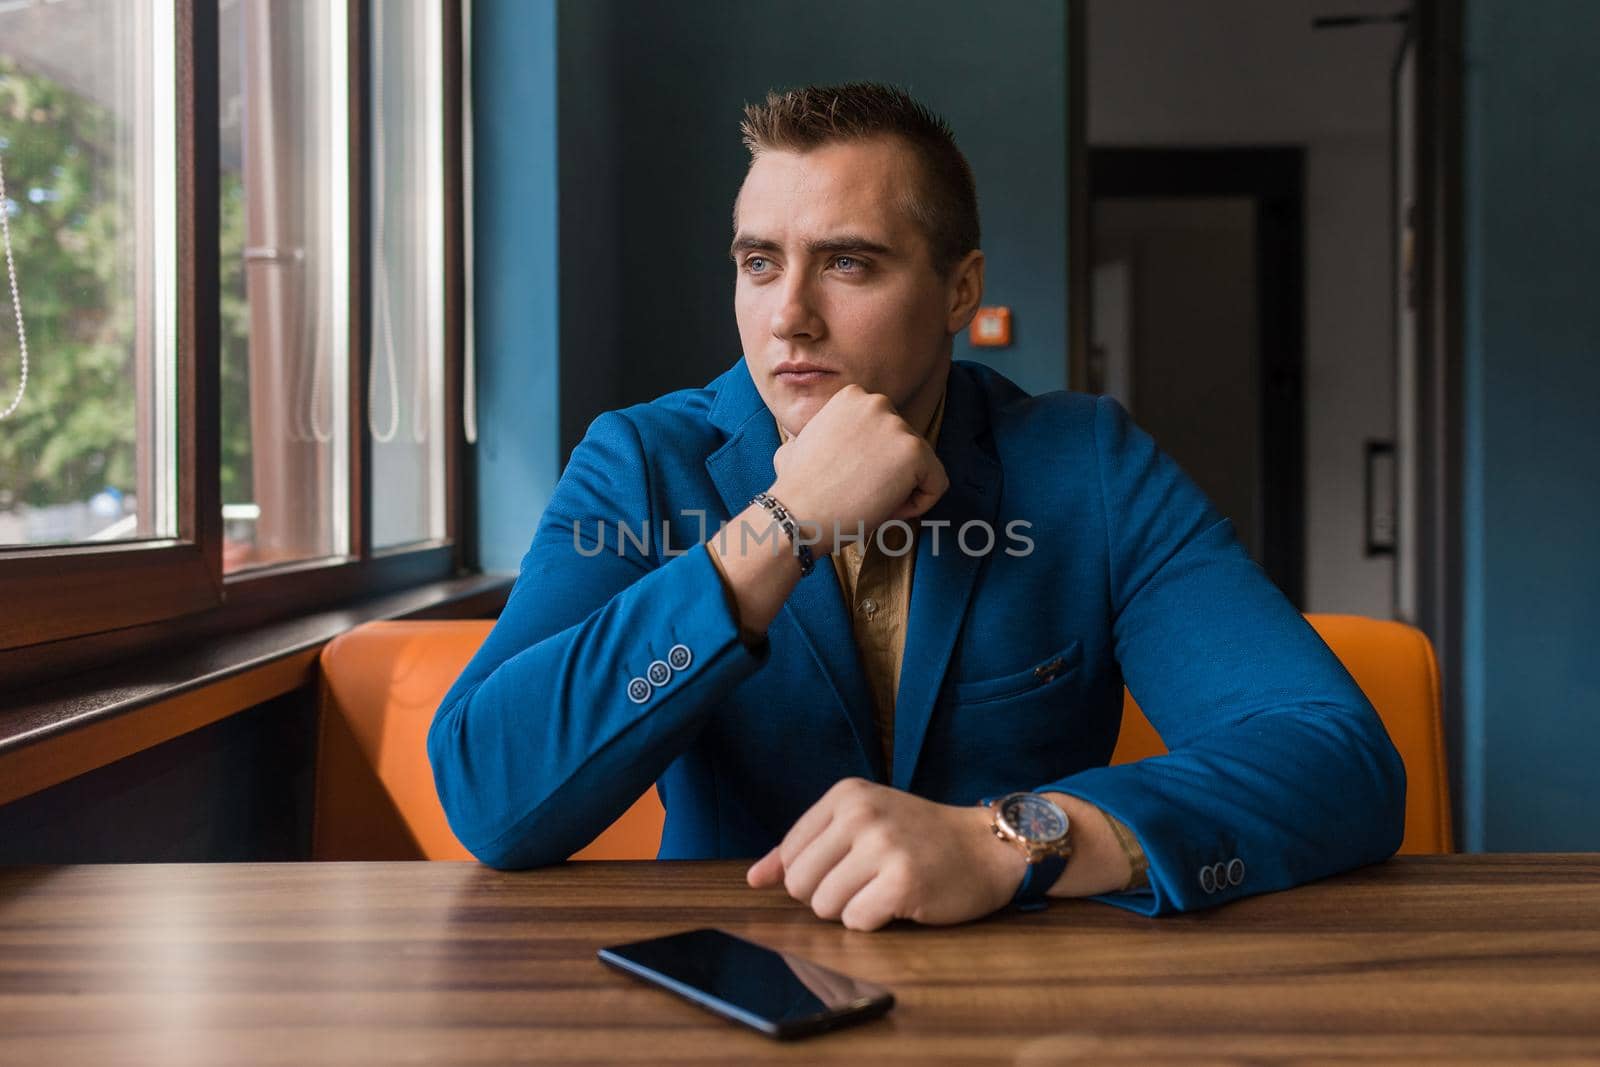 A brooding, stylish businessman portrait of European appearance in a jacket and shirt sits at a table in a cafe for a cup of coffee on a lunch break and looks out the window.